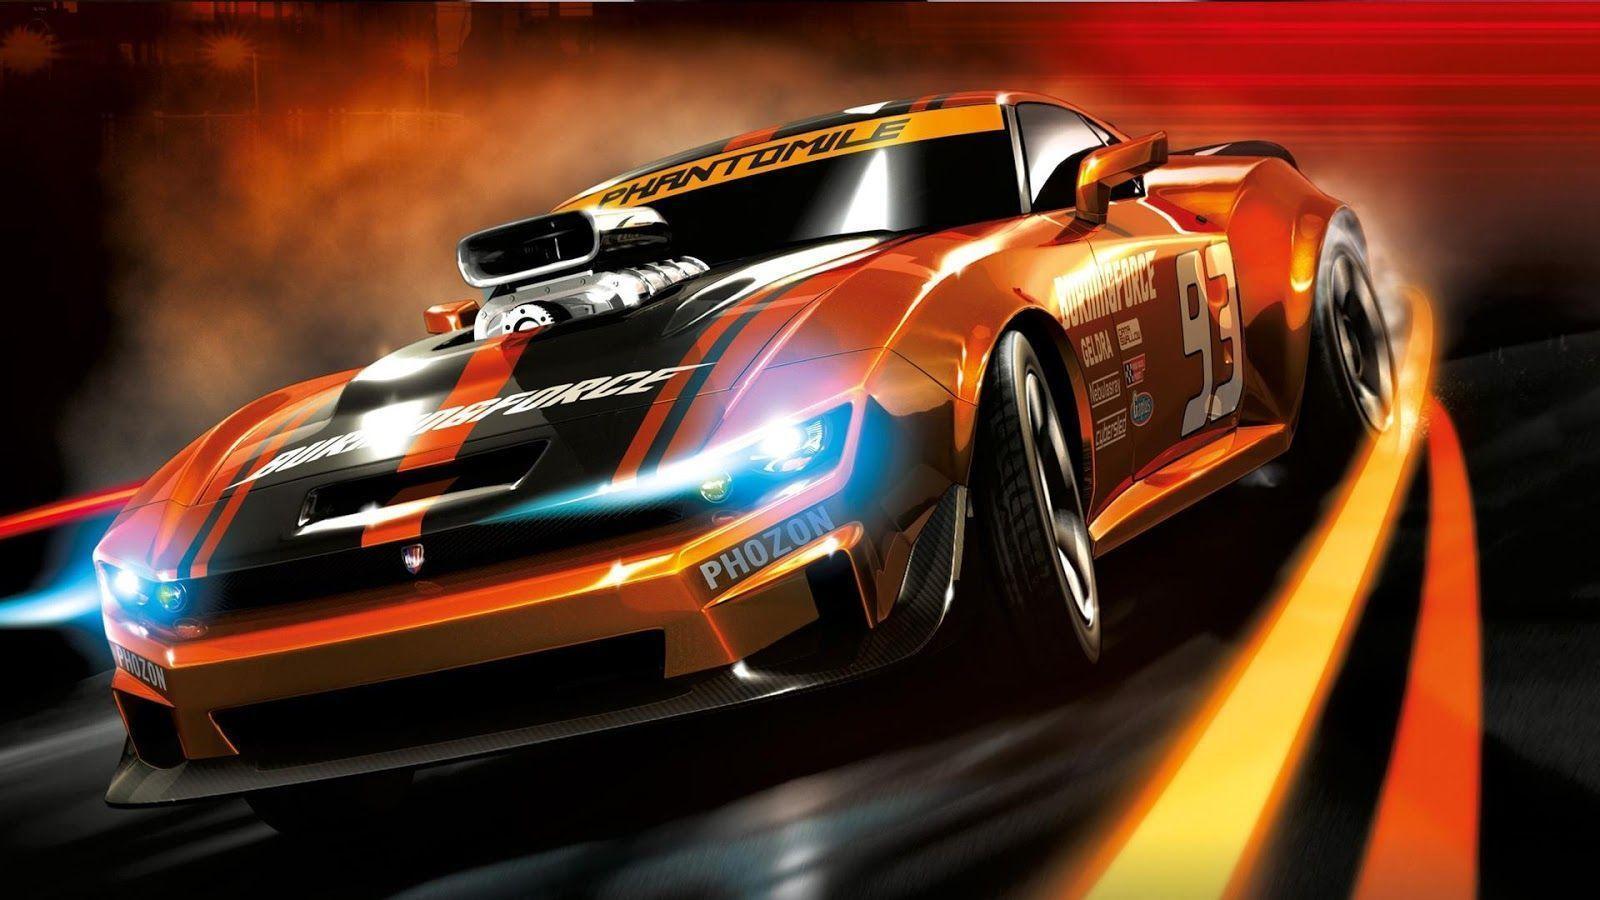 Racing Cars Live Wallpaper Apps on Google Play